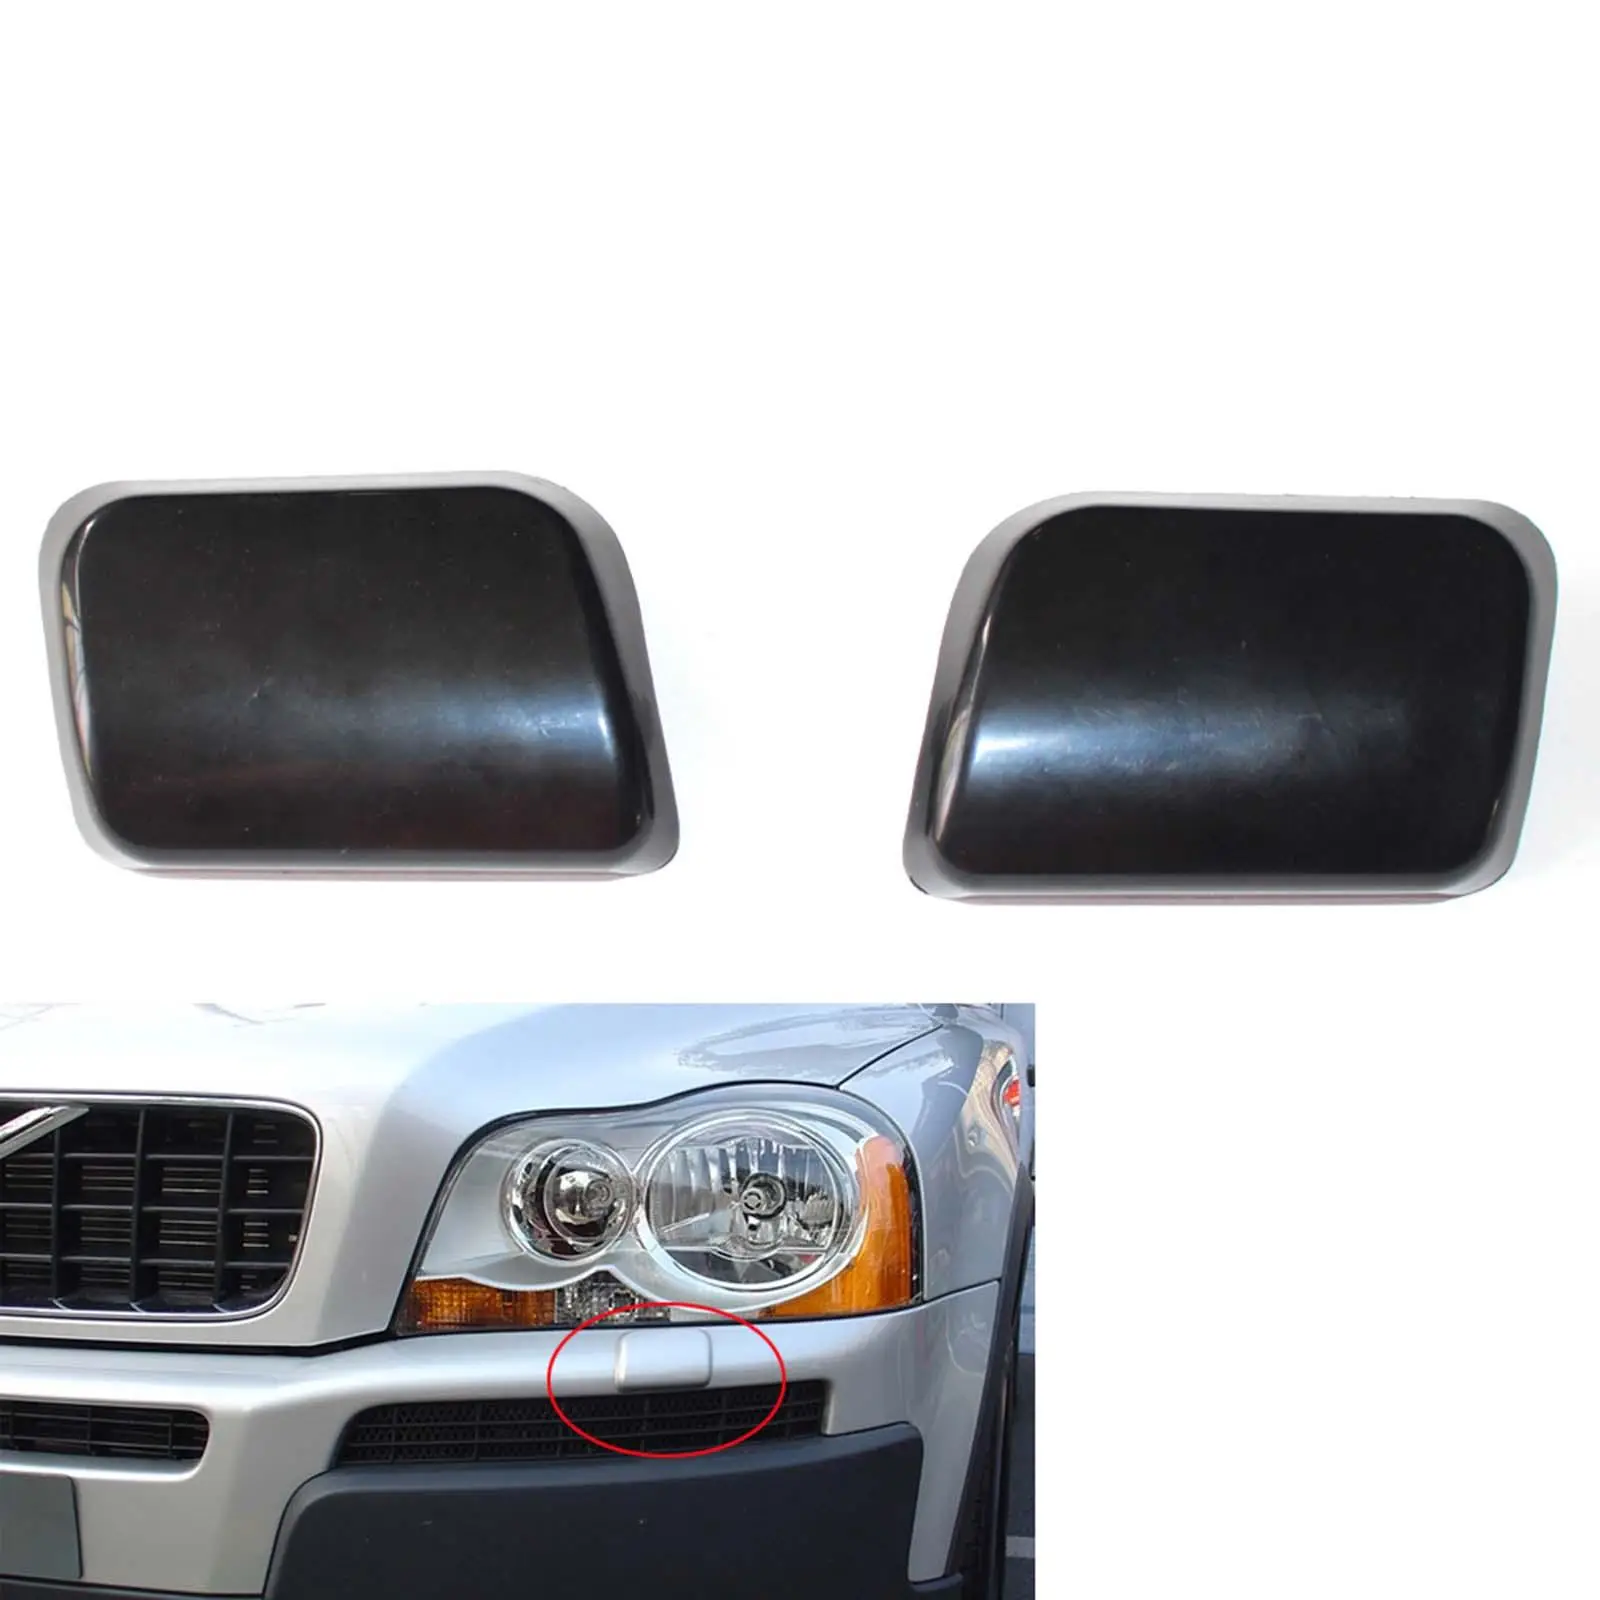 2x Headlight Washer Covers for Volvo  03-06 30698208 30698209